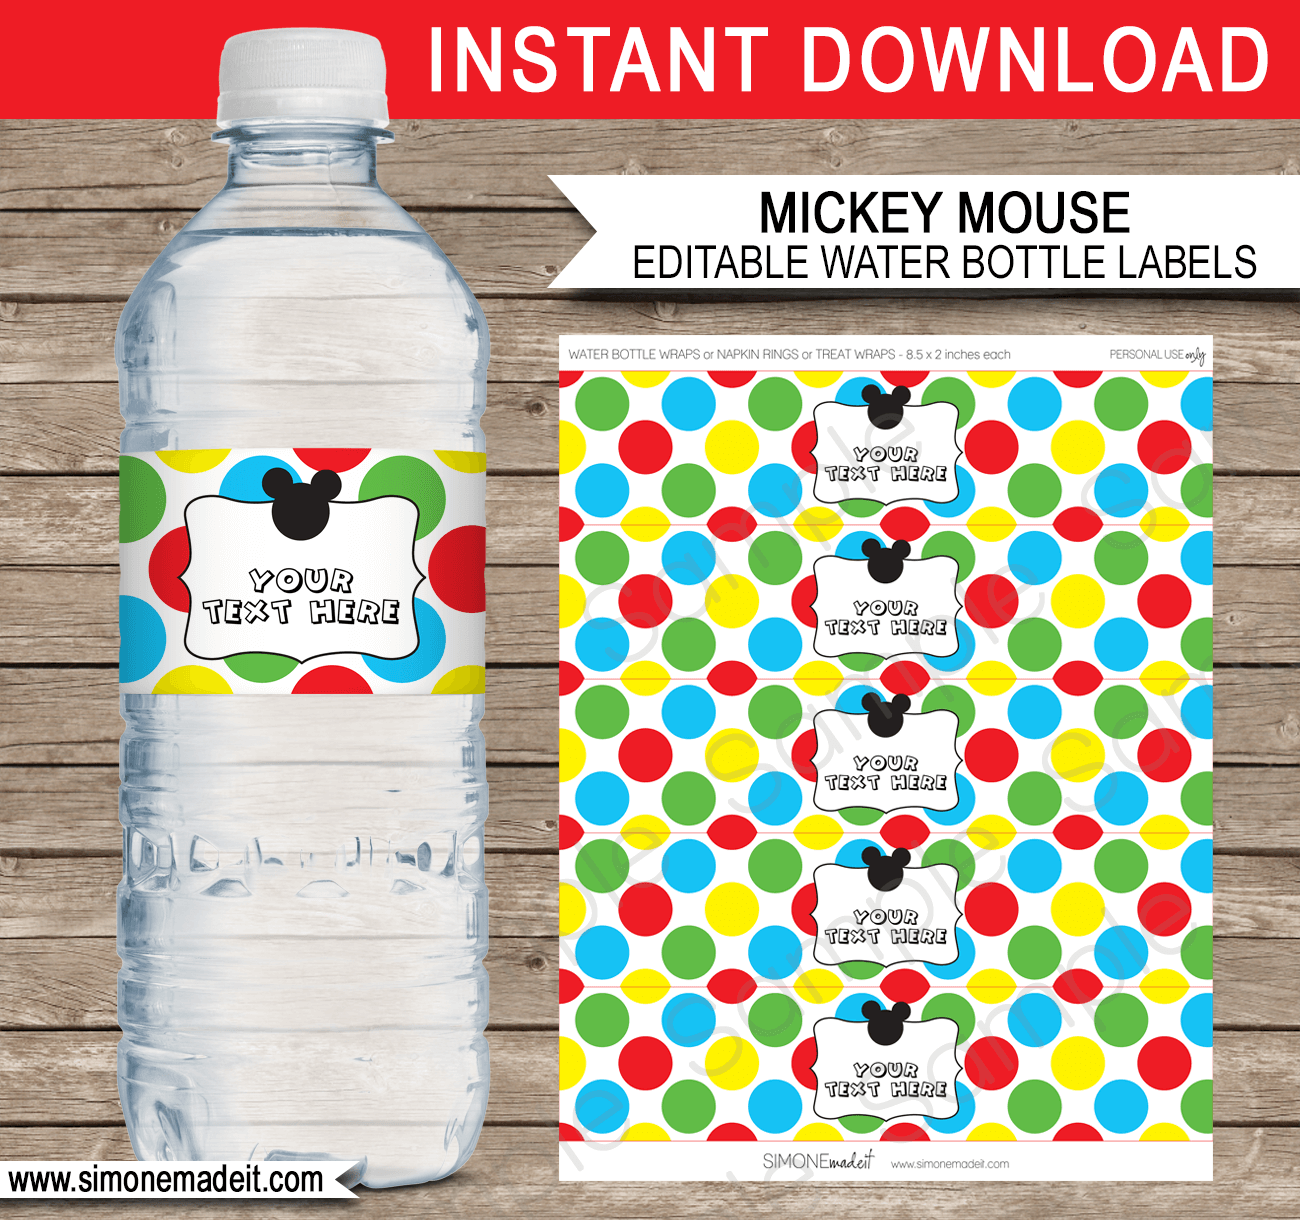 Mickey Mouse Party Water Bottle Labels | Mickey Mouse Birthday Theme | Napkin Wraps | Treat Wraps | DIY Editable Template | INSTANT DOWNLOAD via simonemadeit.com